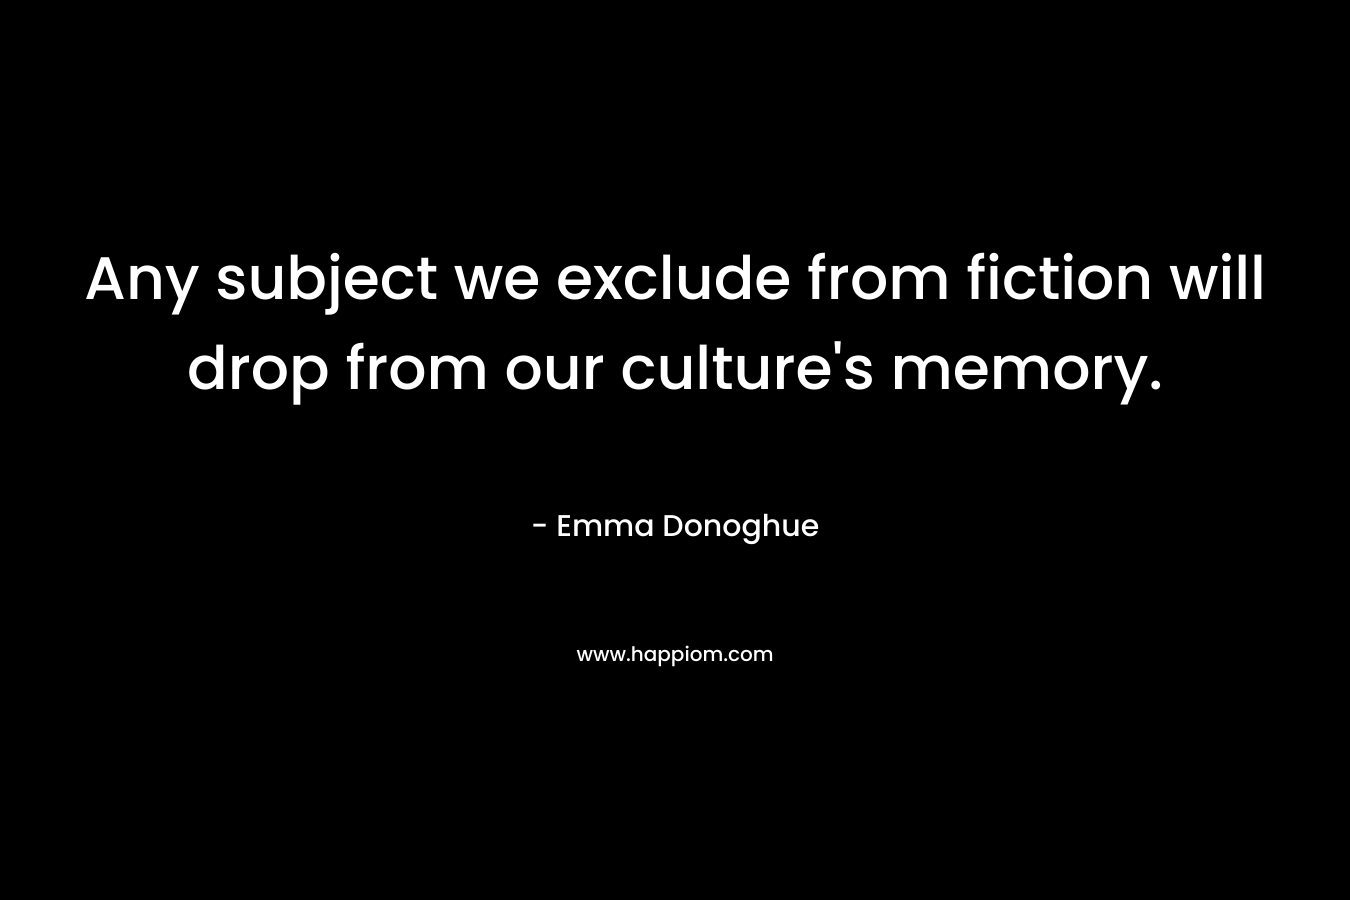 Any subject we exclude from fiction will drop from our culture’s memory. – Emma Donoghue